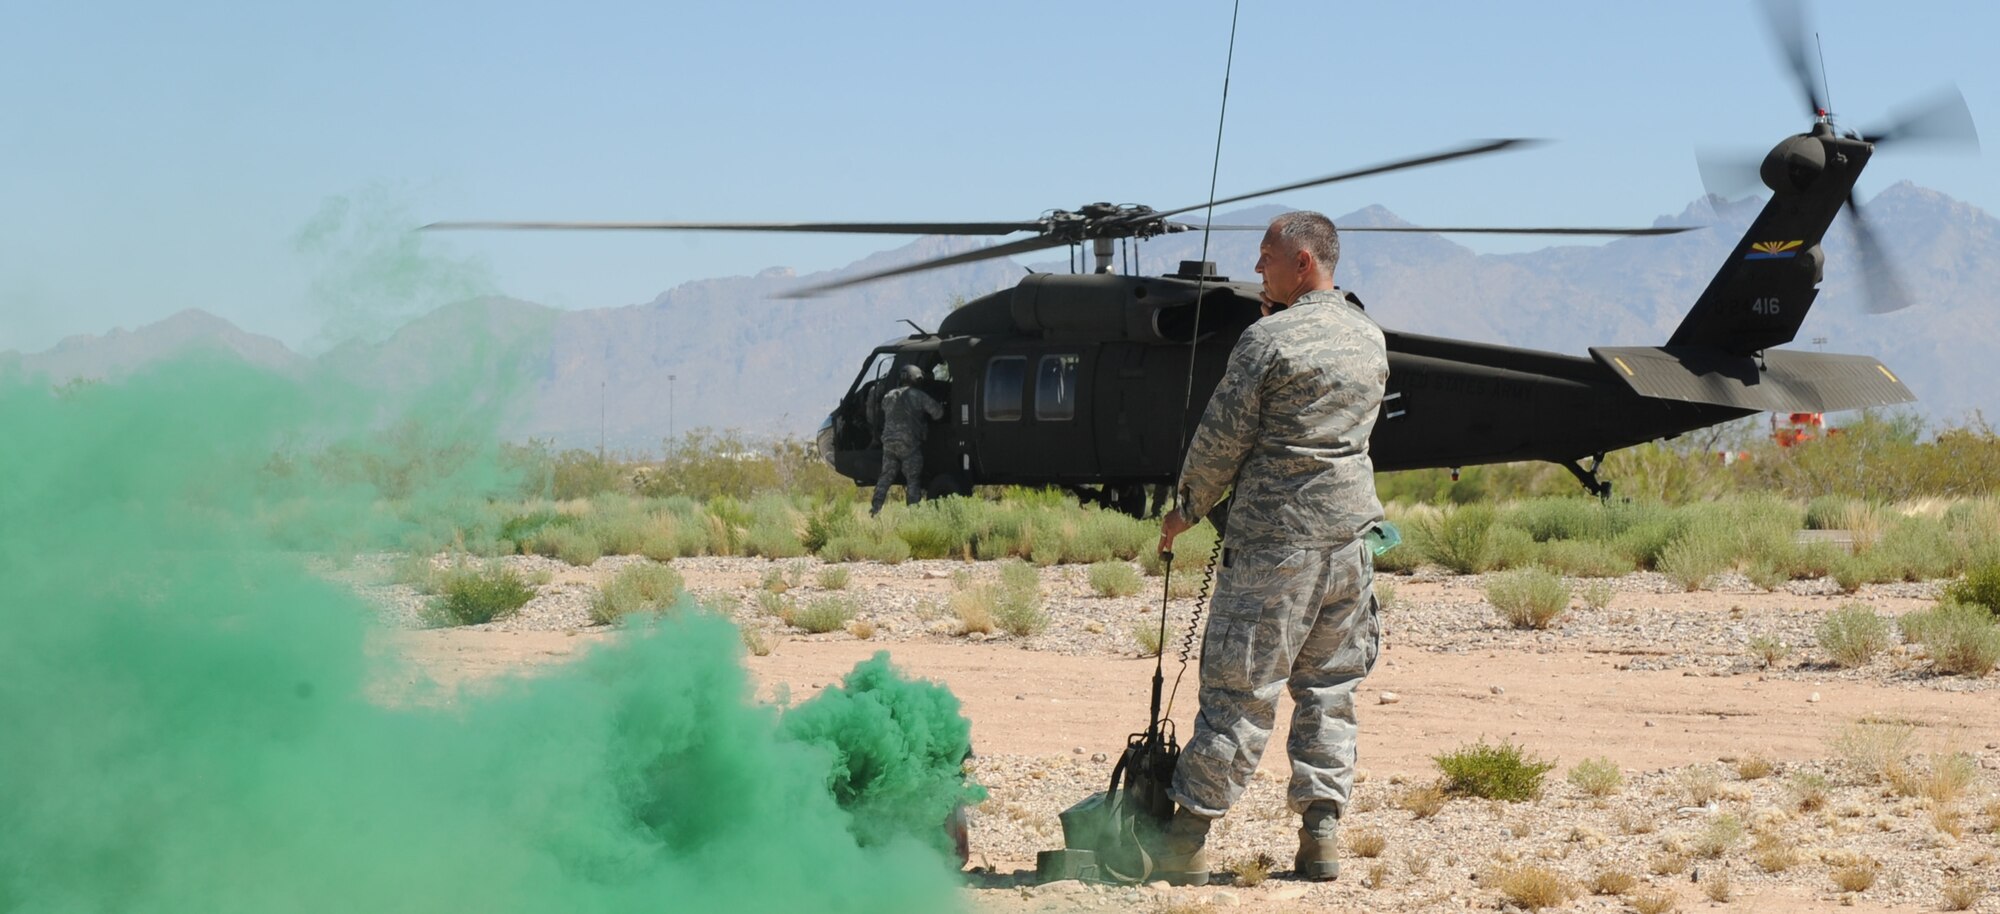 U.S. Air Force Lt. Col. Kjall Gopaul, 355th Mission Support Group deputy commander, radios in to the air crew of a UH-60 Black Hawk during helicopter pre-deployment training at Davis-Monthan Air Force Base, Ariz. June 7. During this training, military members were taught how to get on and off a helicopter quickly and safely, how to provide cover for an aircraft and how to sling-load cargo. (U.S. Air Force photo by Senior Airman Brittany Dowdle/released)